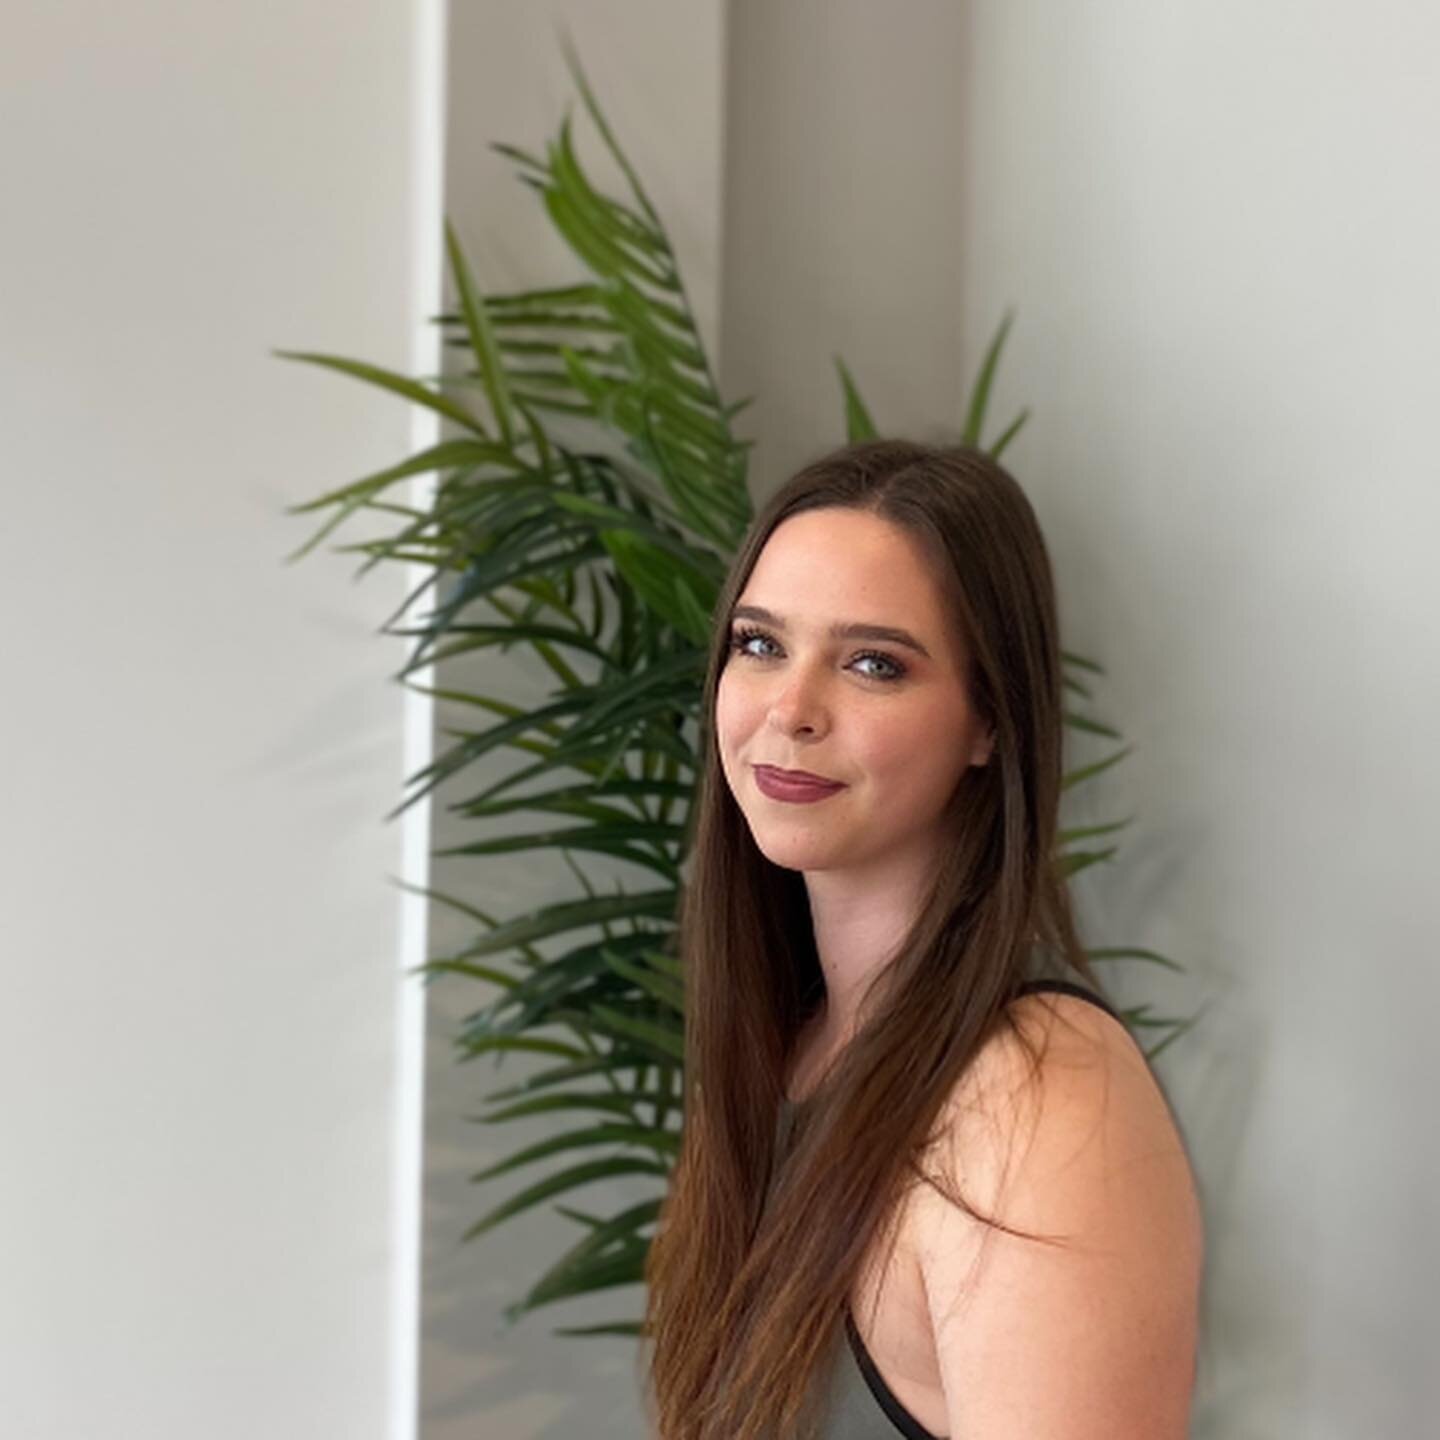 Introducing Isabel 👋 

Isabel joined the team in October after working in various educational settings and is currently studying for her accounting qualification. You can find her powerlifting at the gym or crunching numbers in our Eastbourne office